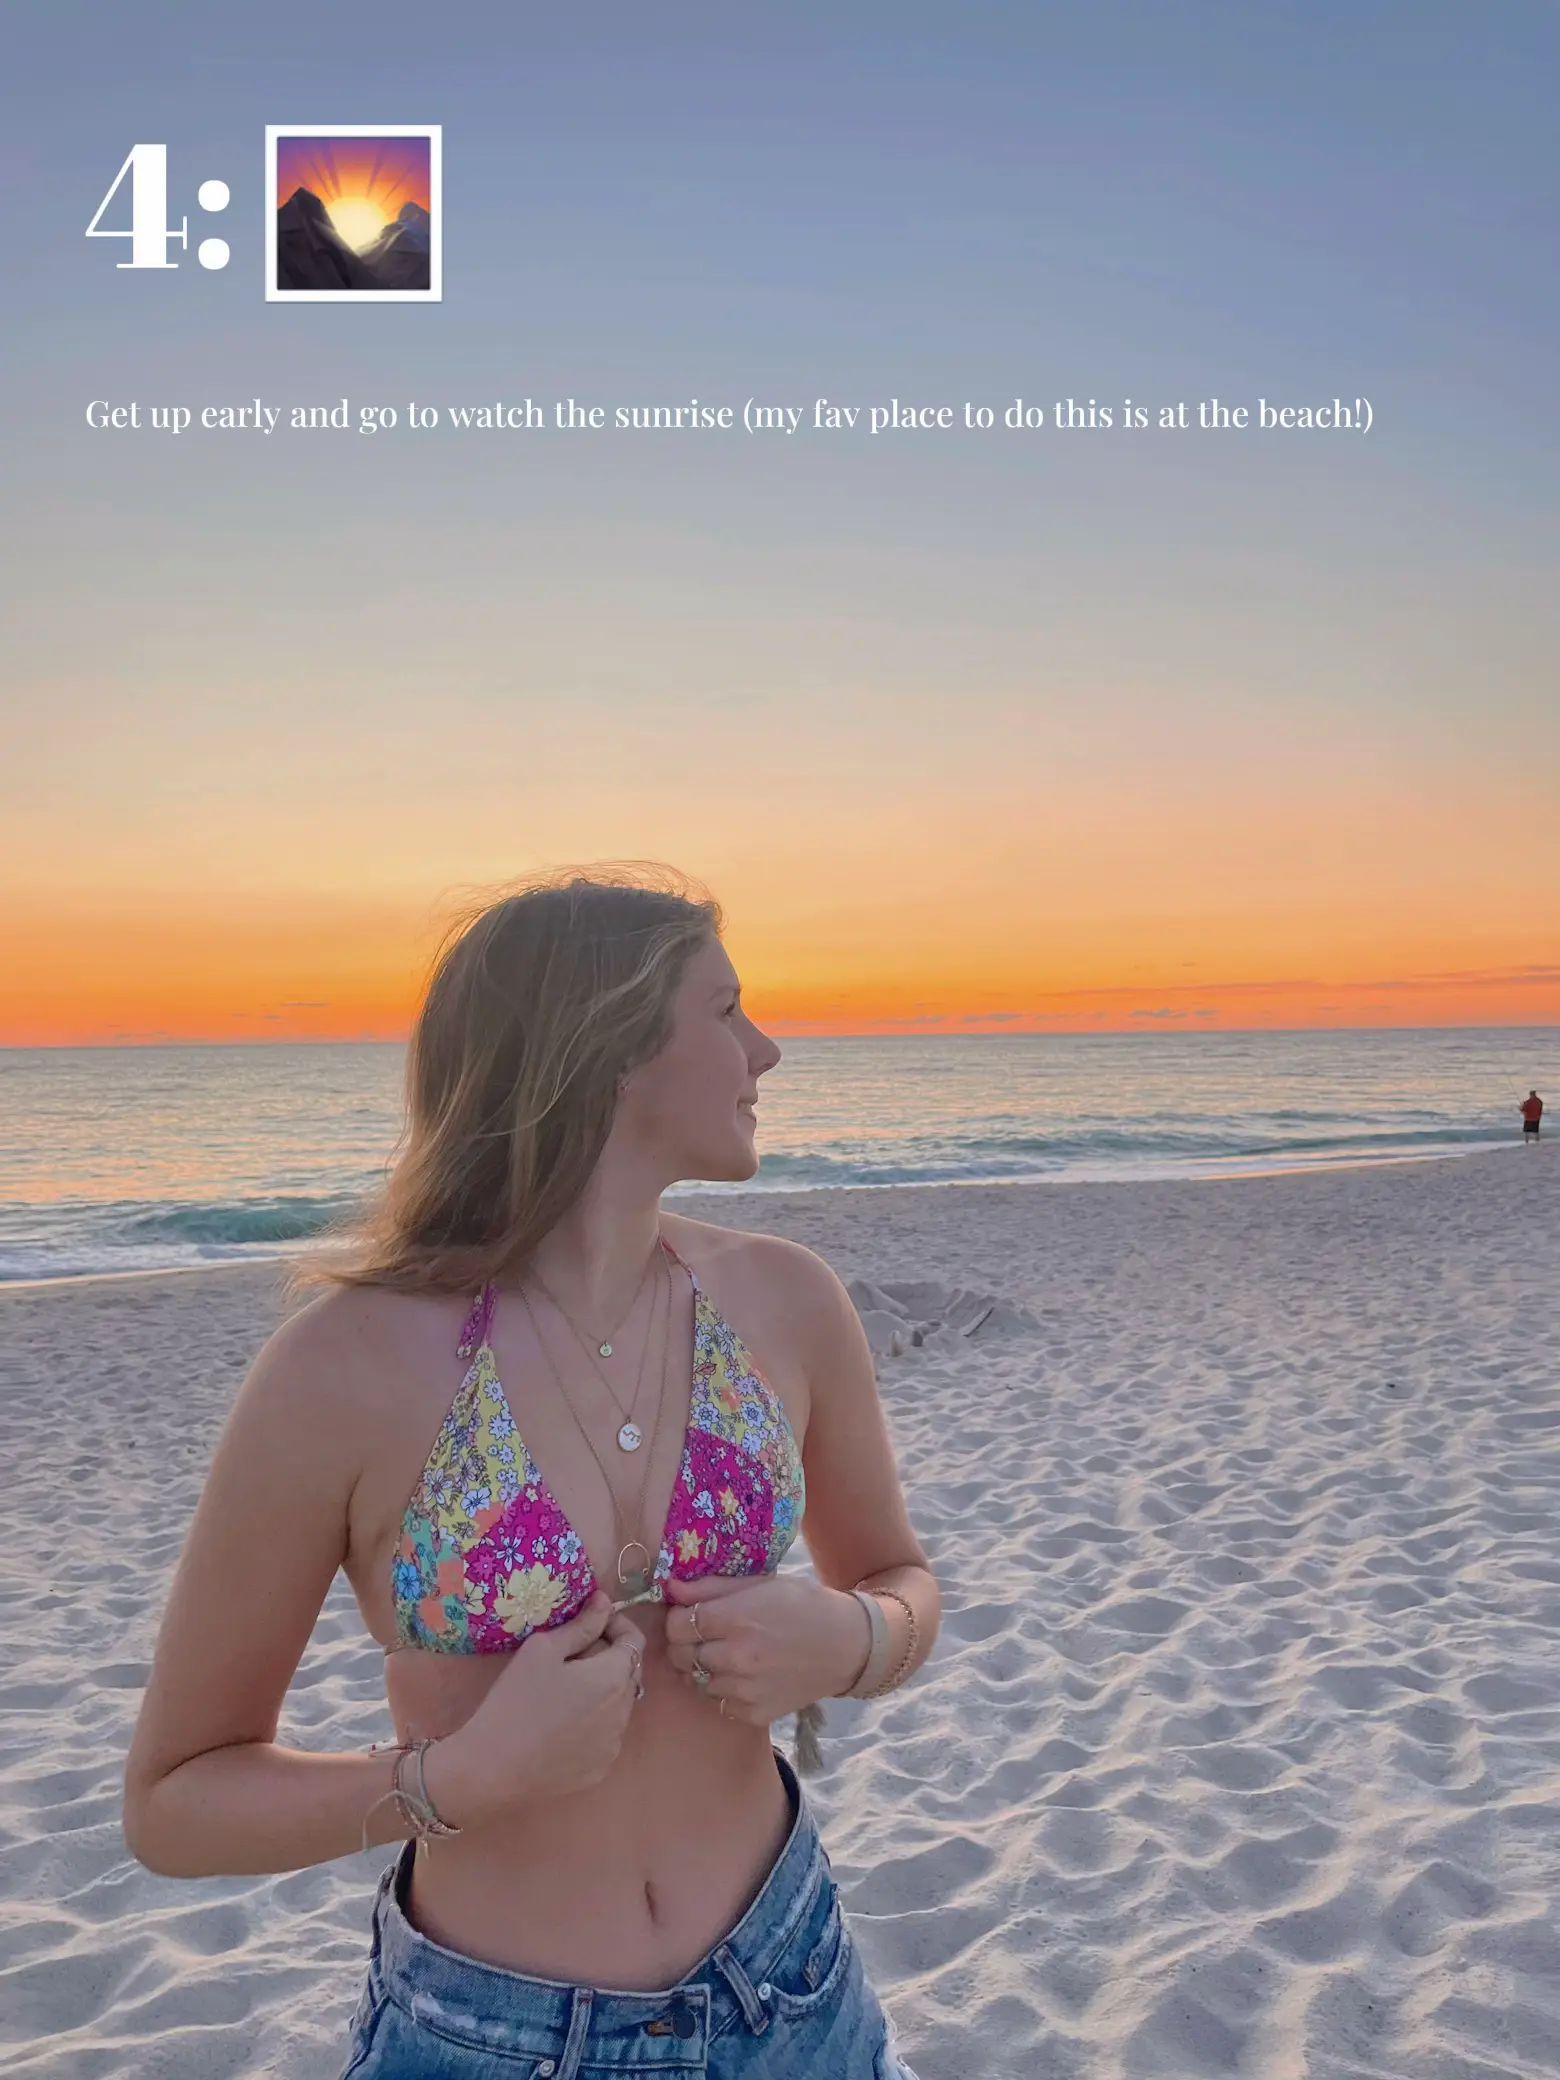  A woman in a bikini is standing on a beach, watching the sunrise.